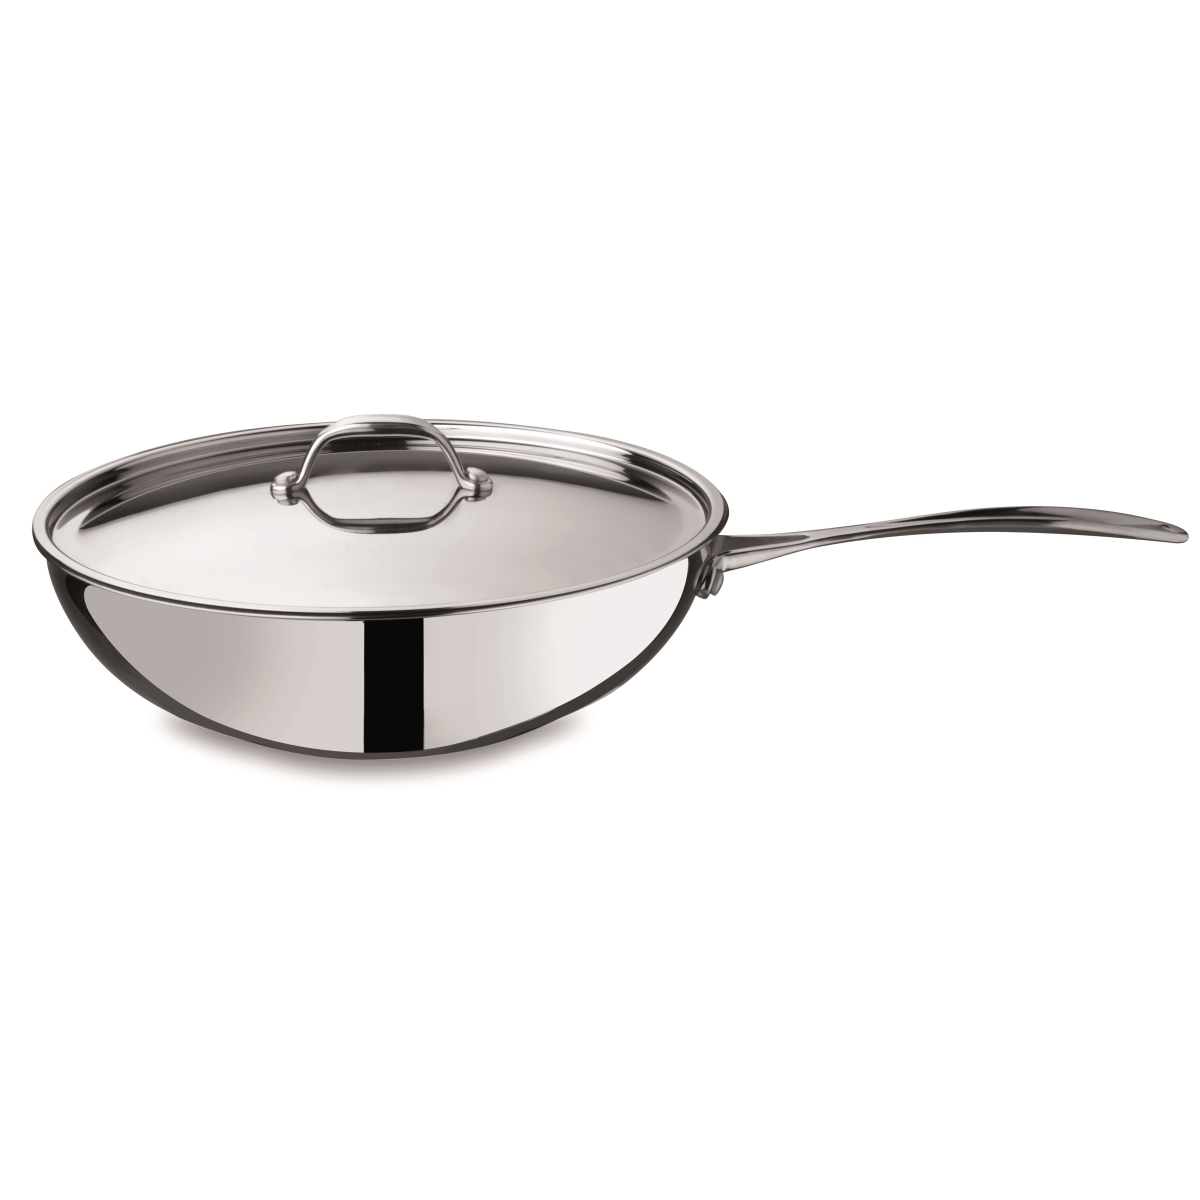 Picture of Mepra 30217828 28 cm Glamour Diamond Wok with Lid